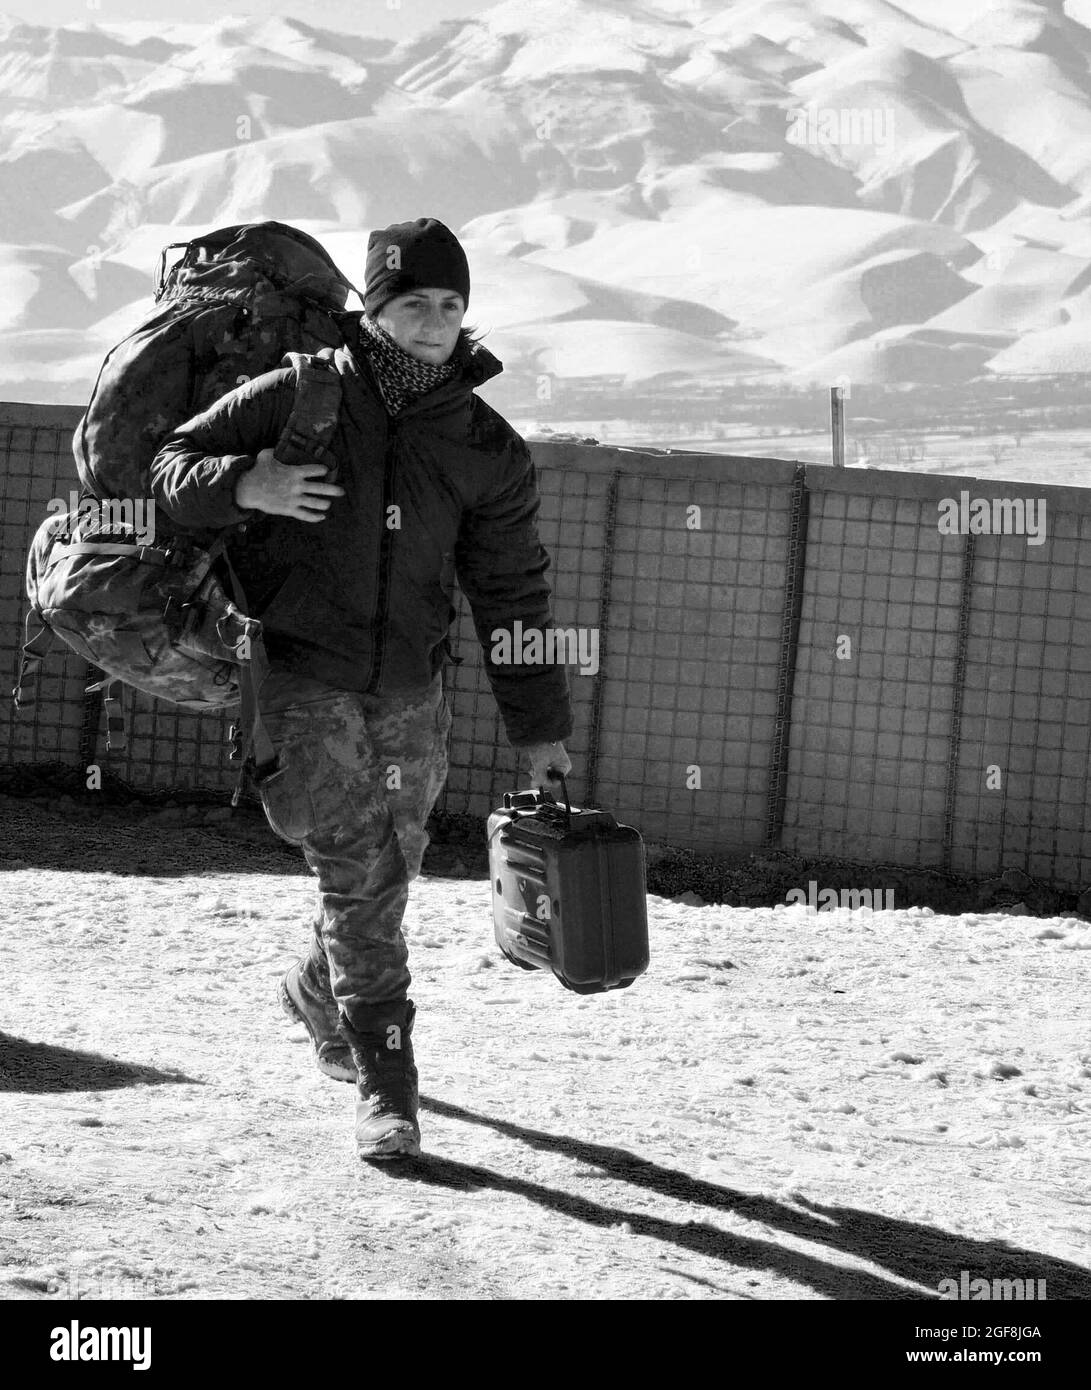 Cpl. Maj. (E-4) Mezzullo Filomena, a mountain soldier from the 6th Company, Tolmezzo Battalion, 8 Alpini Regiment, Julia Brigade, prepares for a convoy from Combat Outpost Sigma to Forward Operating Base Todd, Bala Murghab, Baghdis province, Afghanistan, Jan. 14, 2011. To Filomena, being Alpini means a unity among her brother and sister Alpine soldiers. Stock Photo